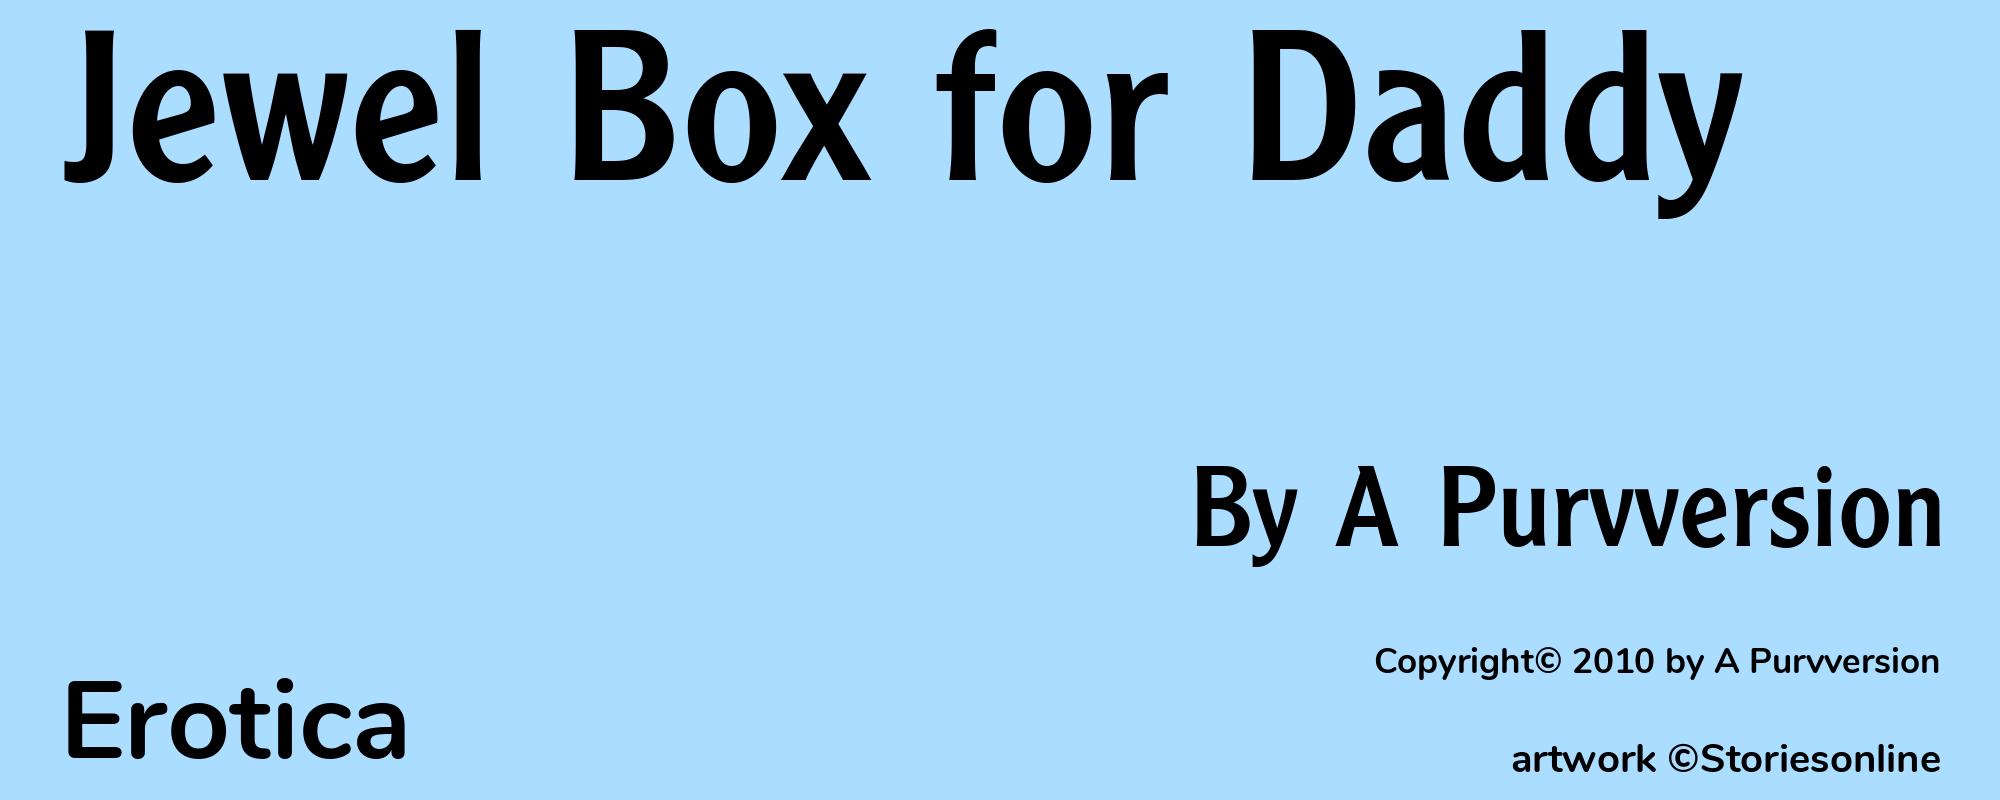 Jewel Box for Daddy - Cover